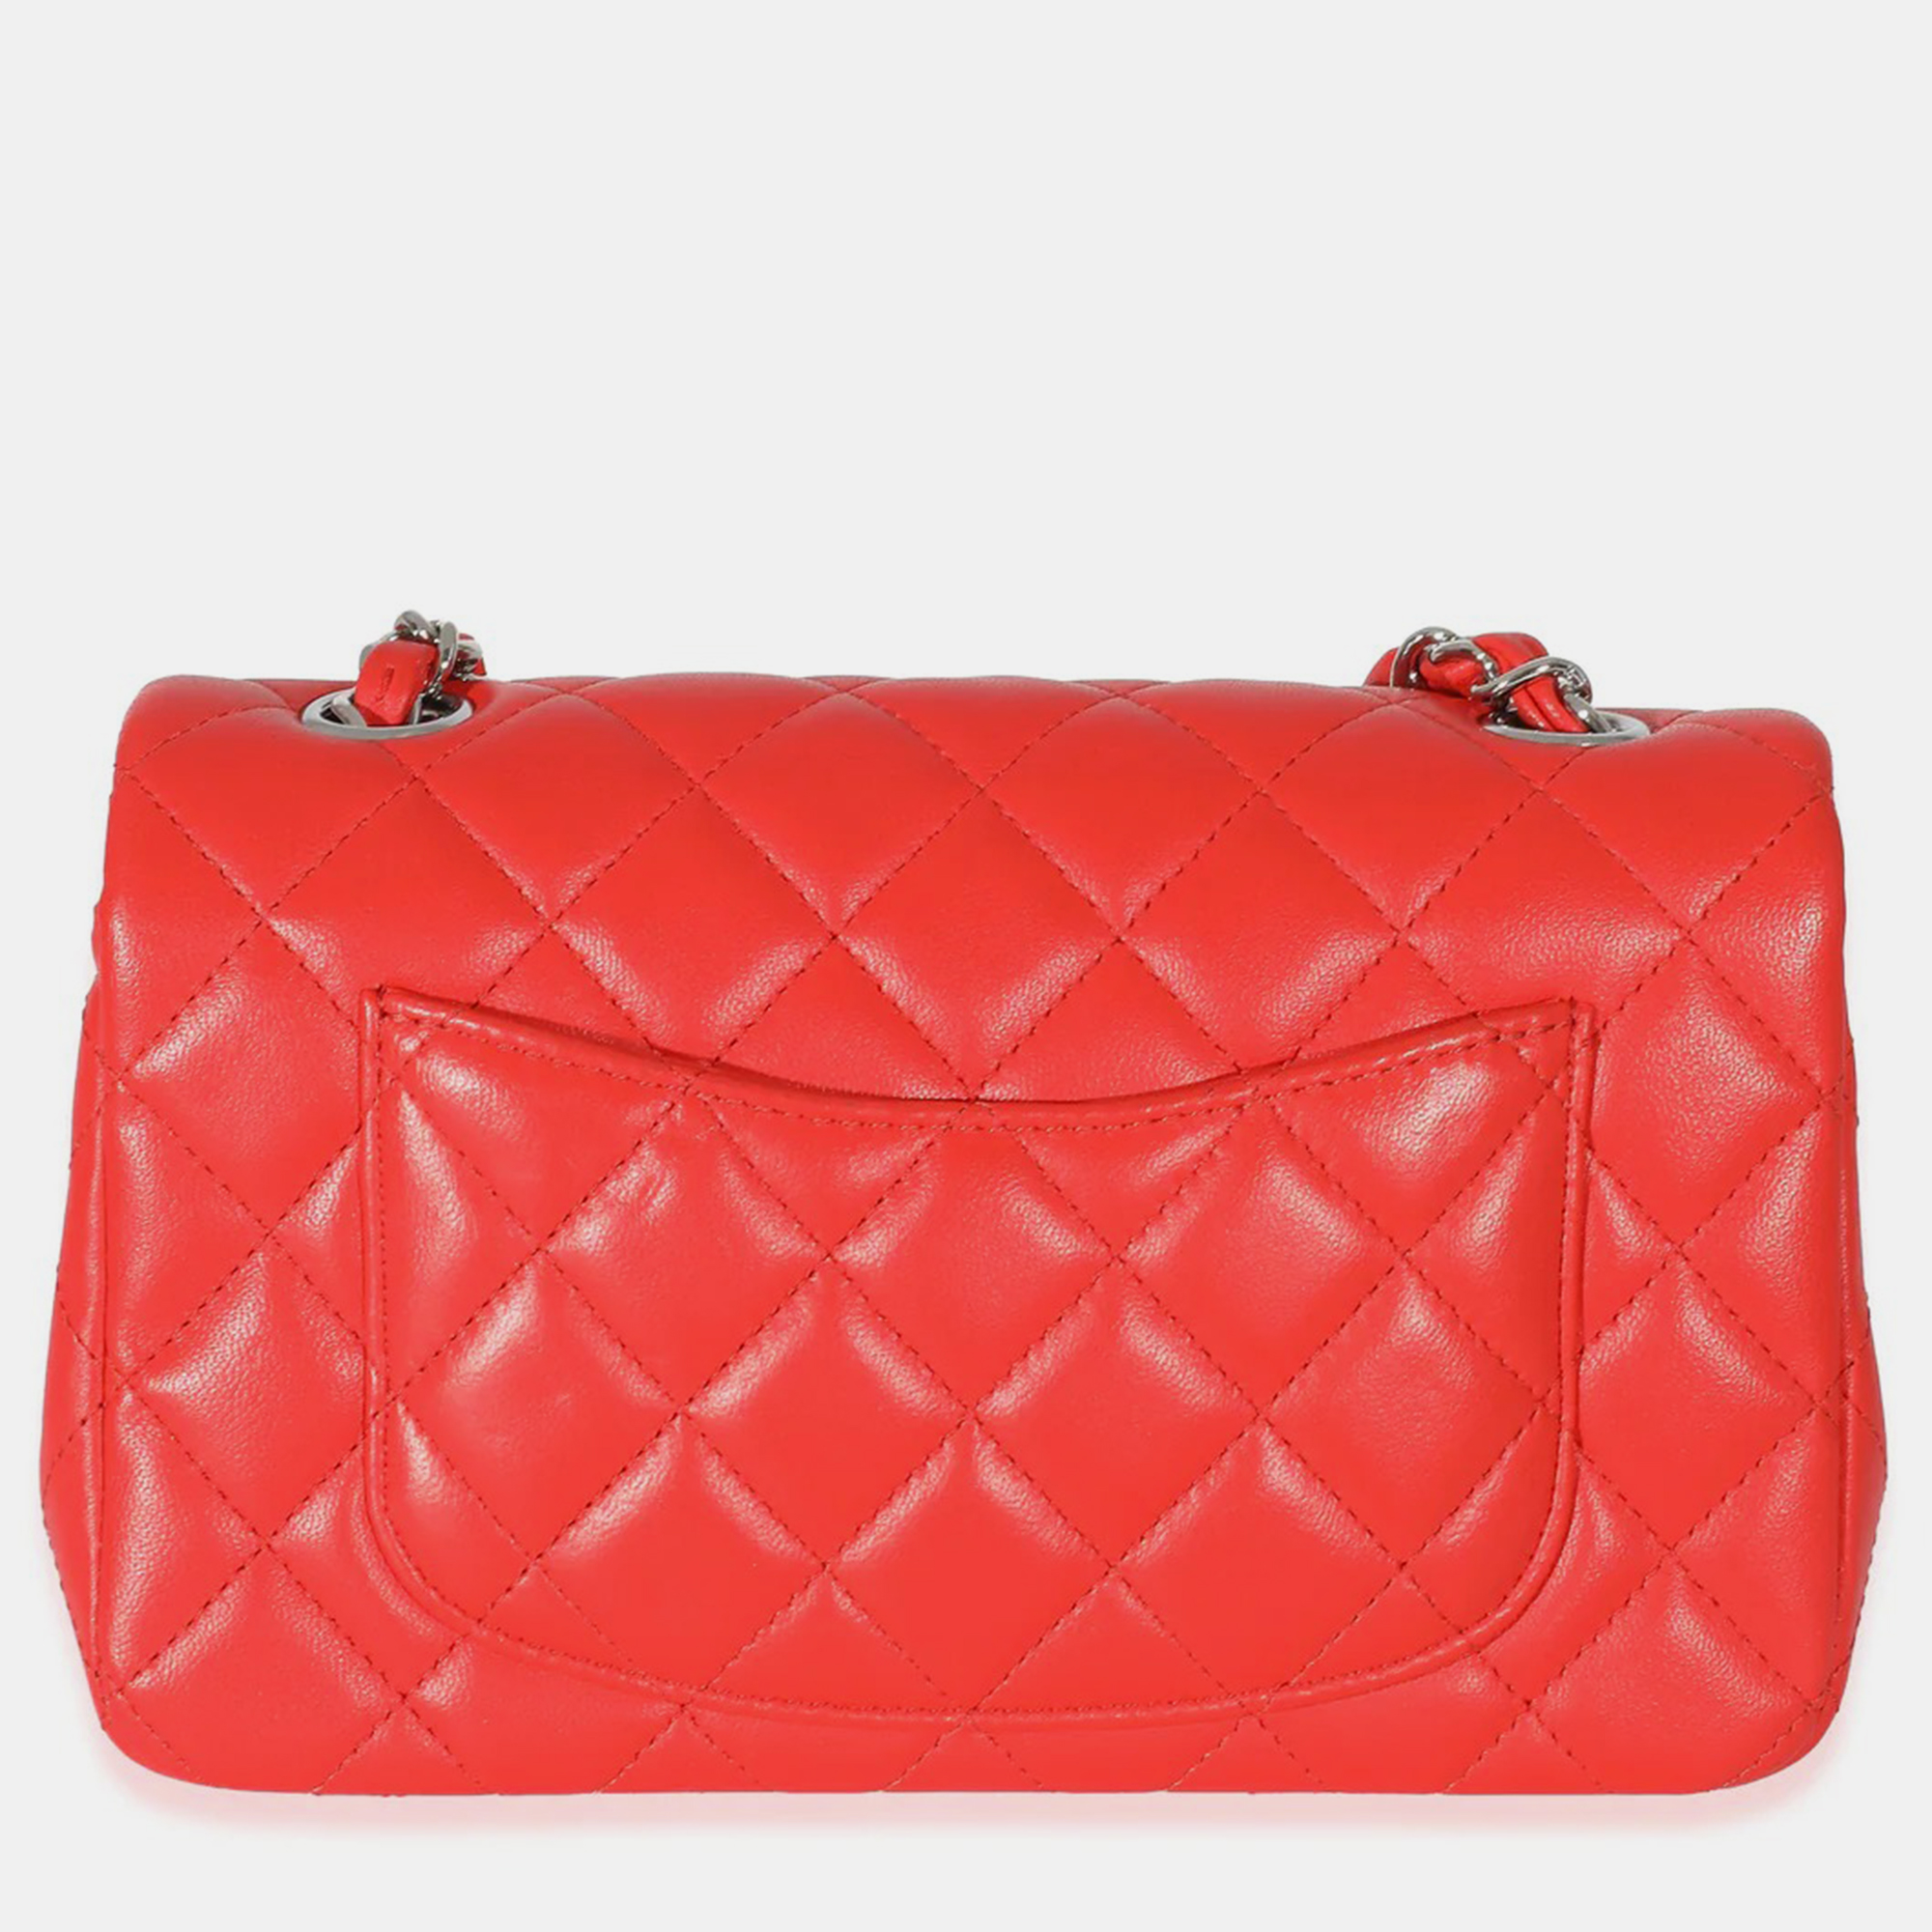 Chanel Red Quilted Lambskin Mini Rectangular Flap Bag